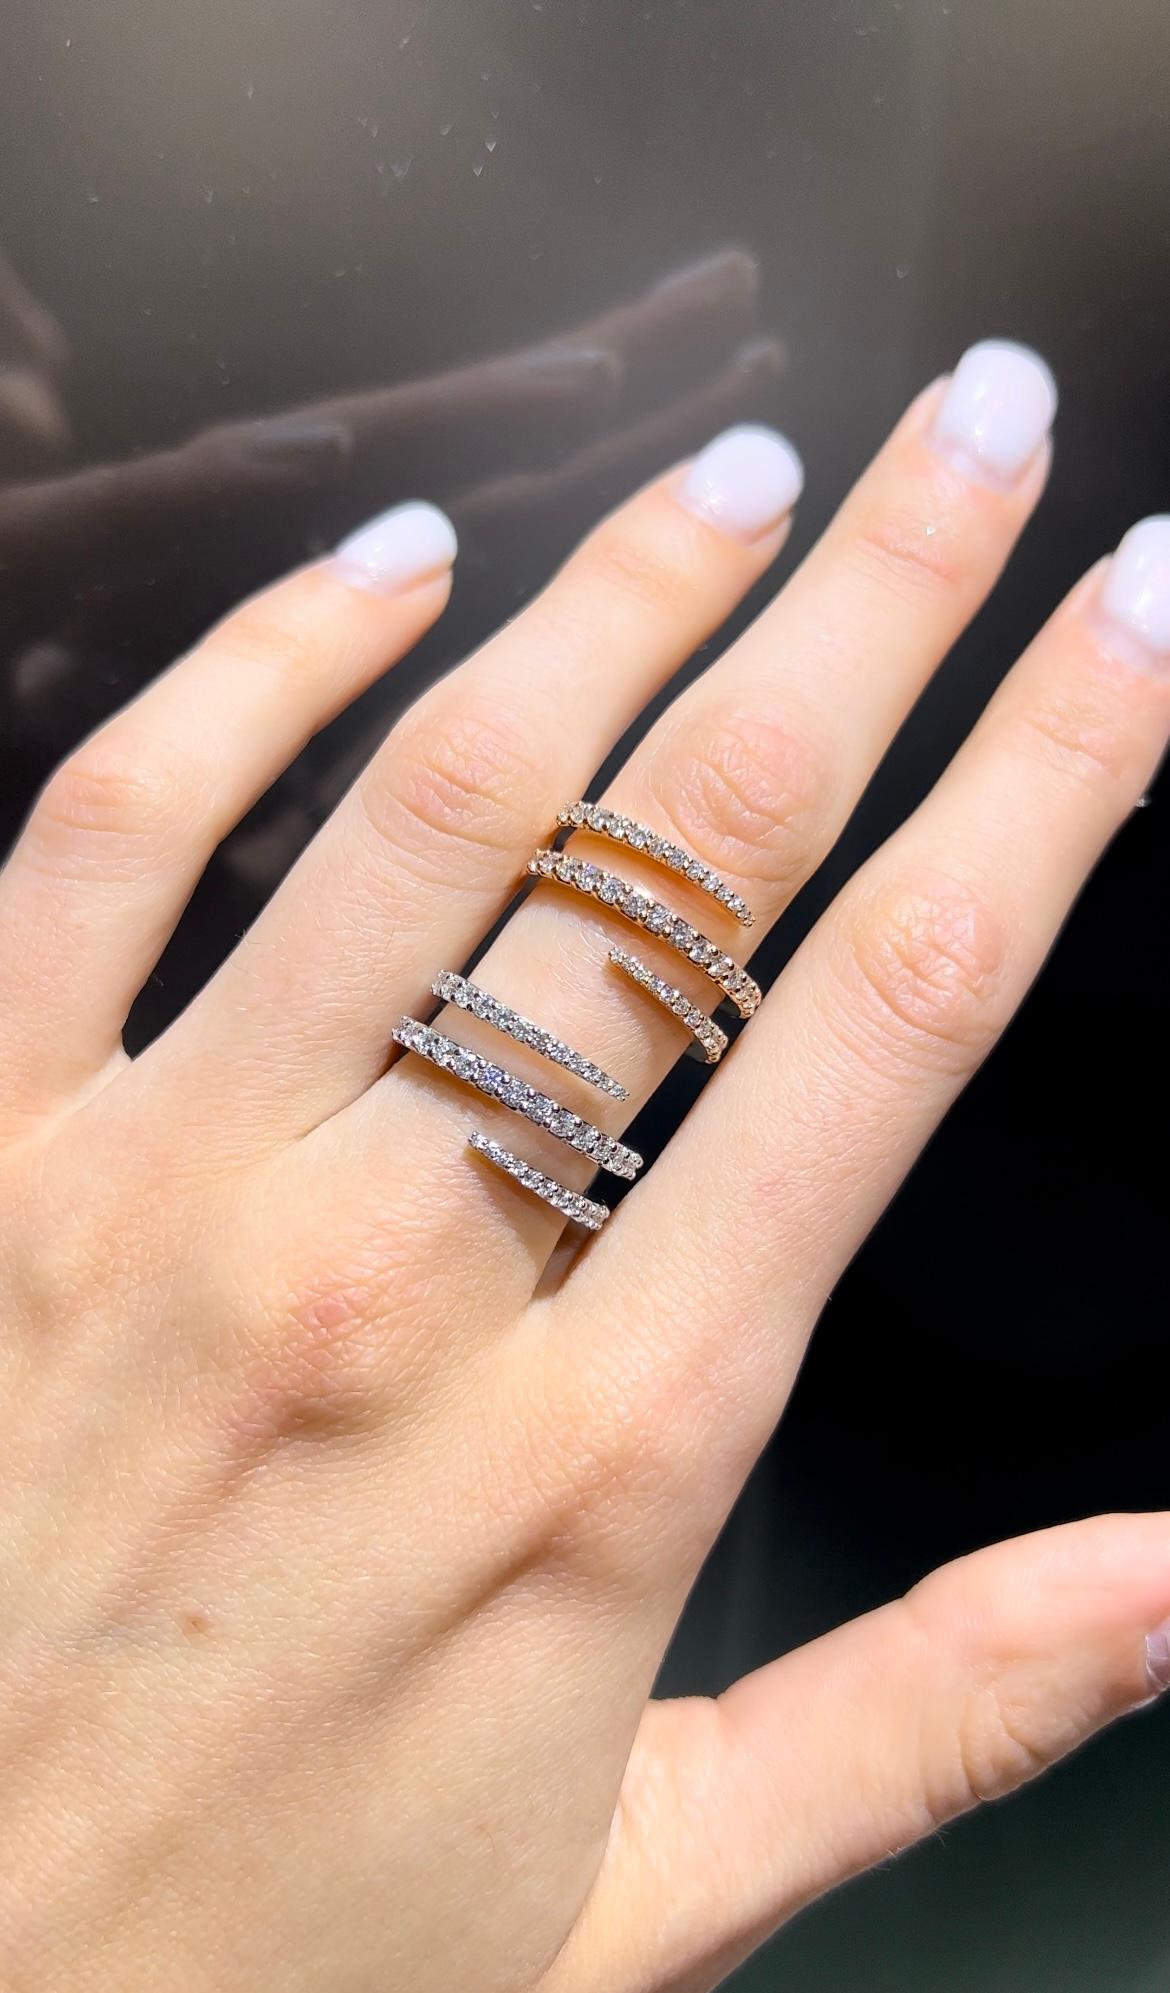  Elizabeth Fine Jewelry 0.83 Carat Diamond Multi-Row Spiral Ring 18k Rose Gold In New Condition For Sale In New York, NY